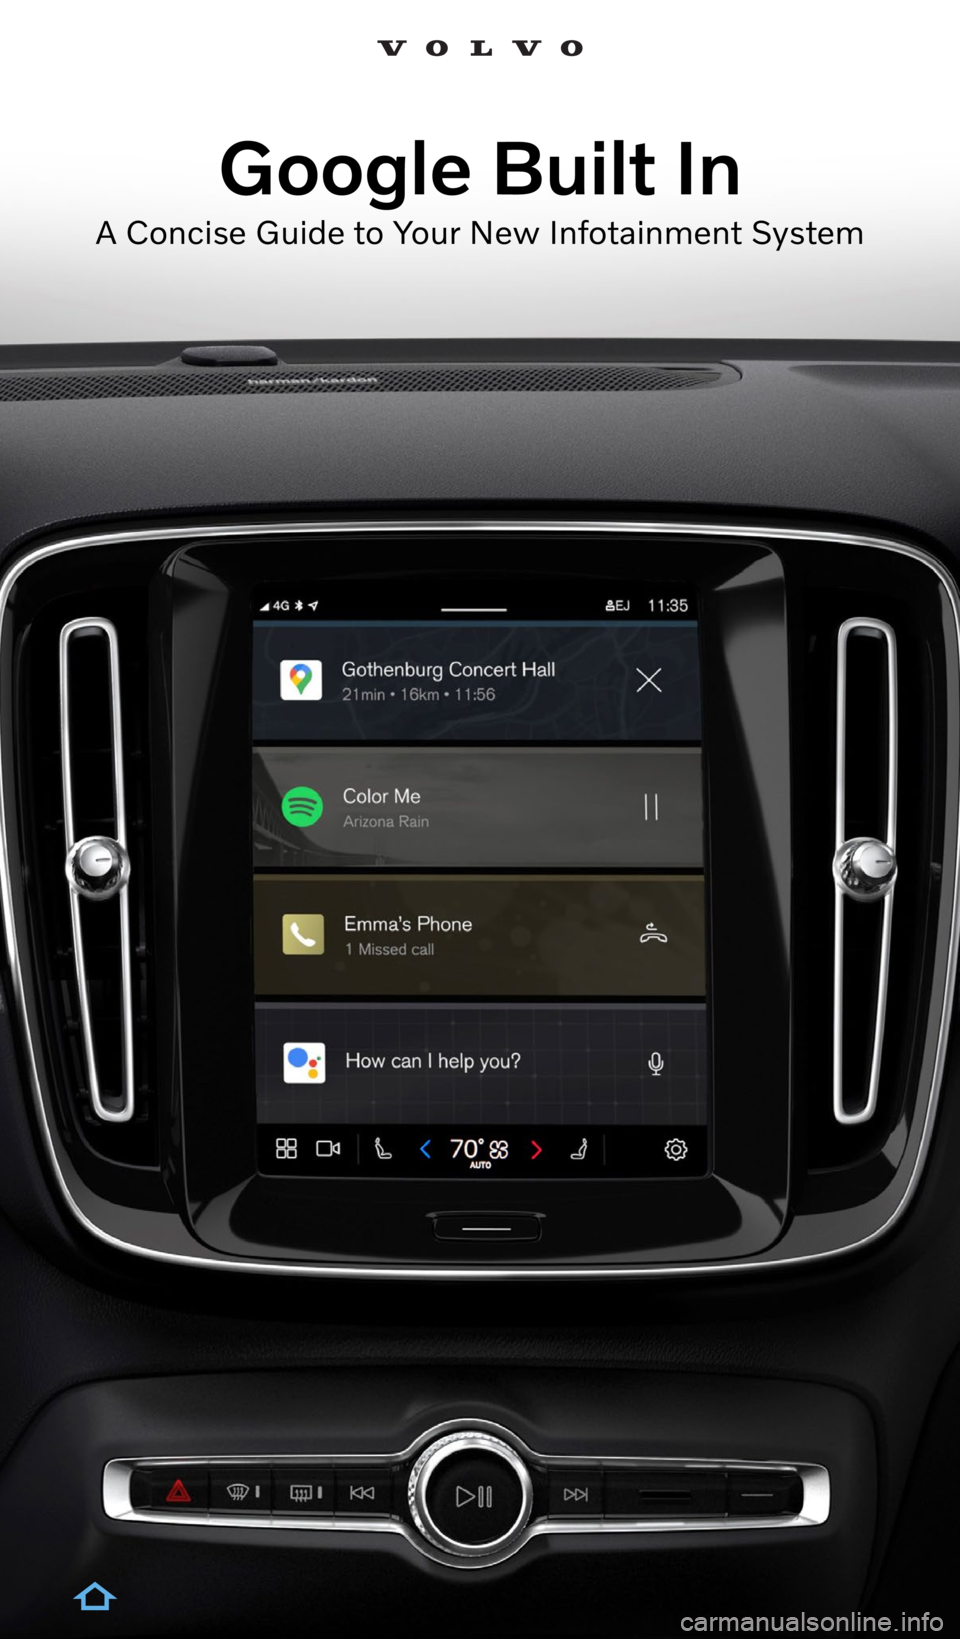 VOLVO XC60 2022  Google Digital Guide Google Built In
A Concise Guide to Your New Infotainment System  